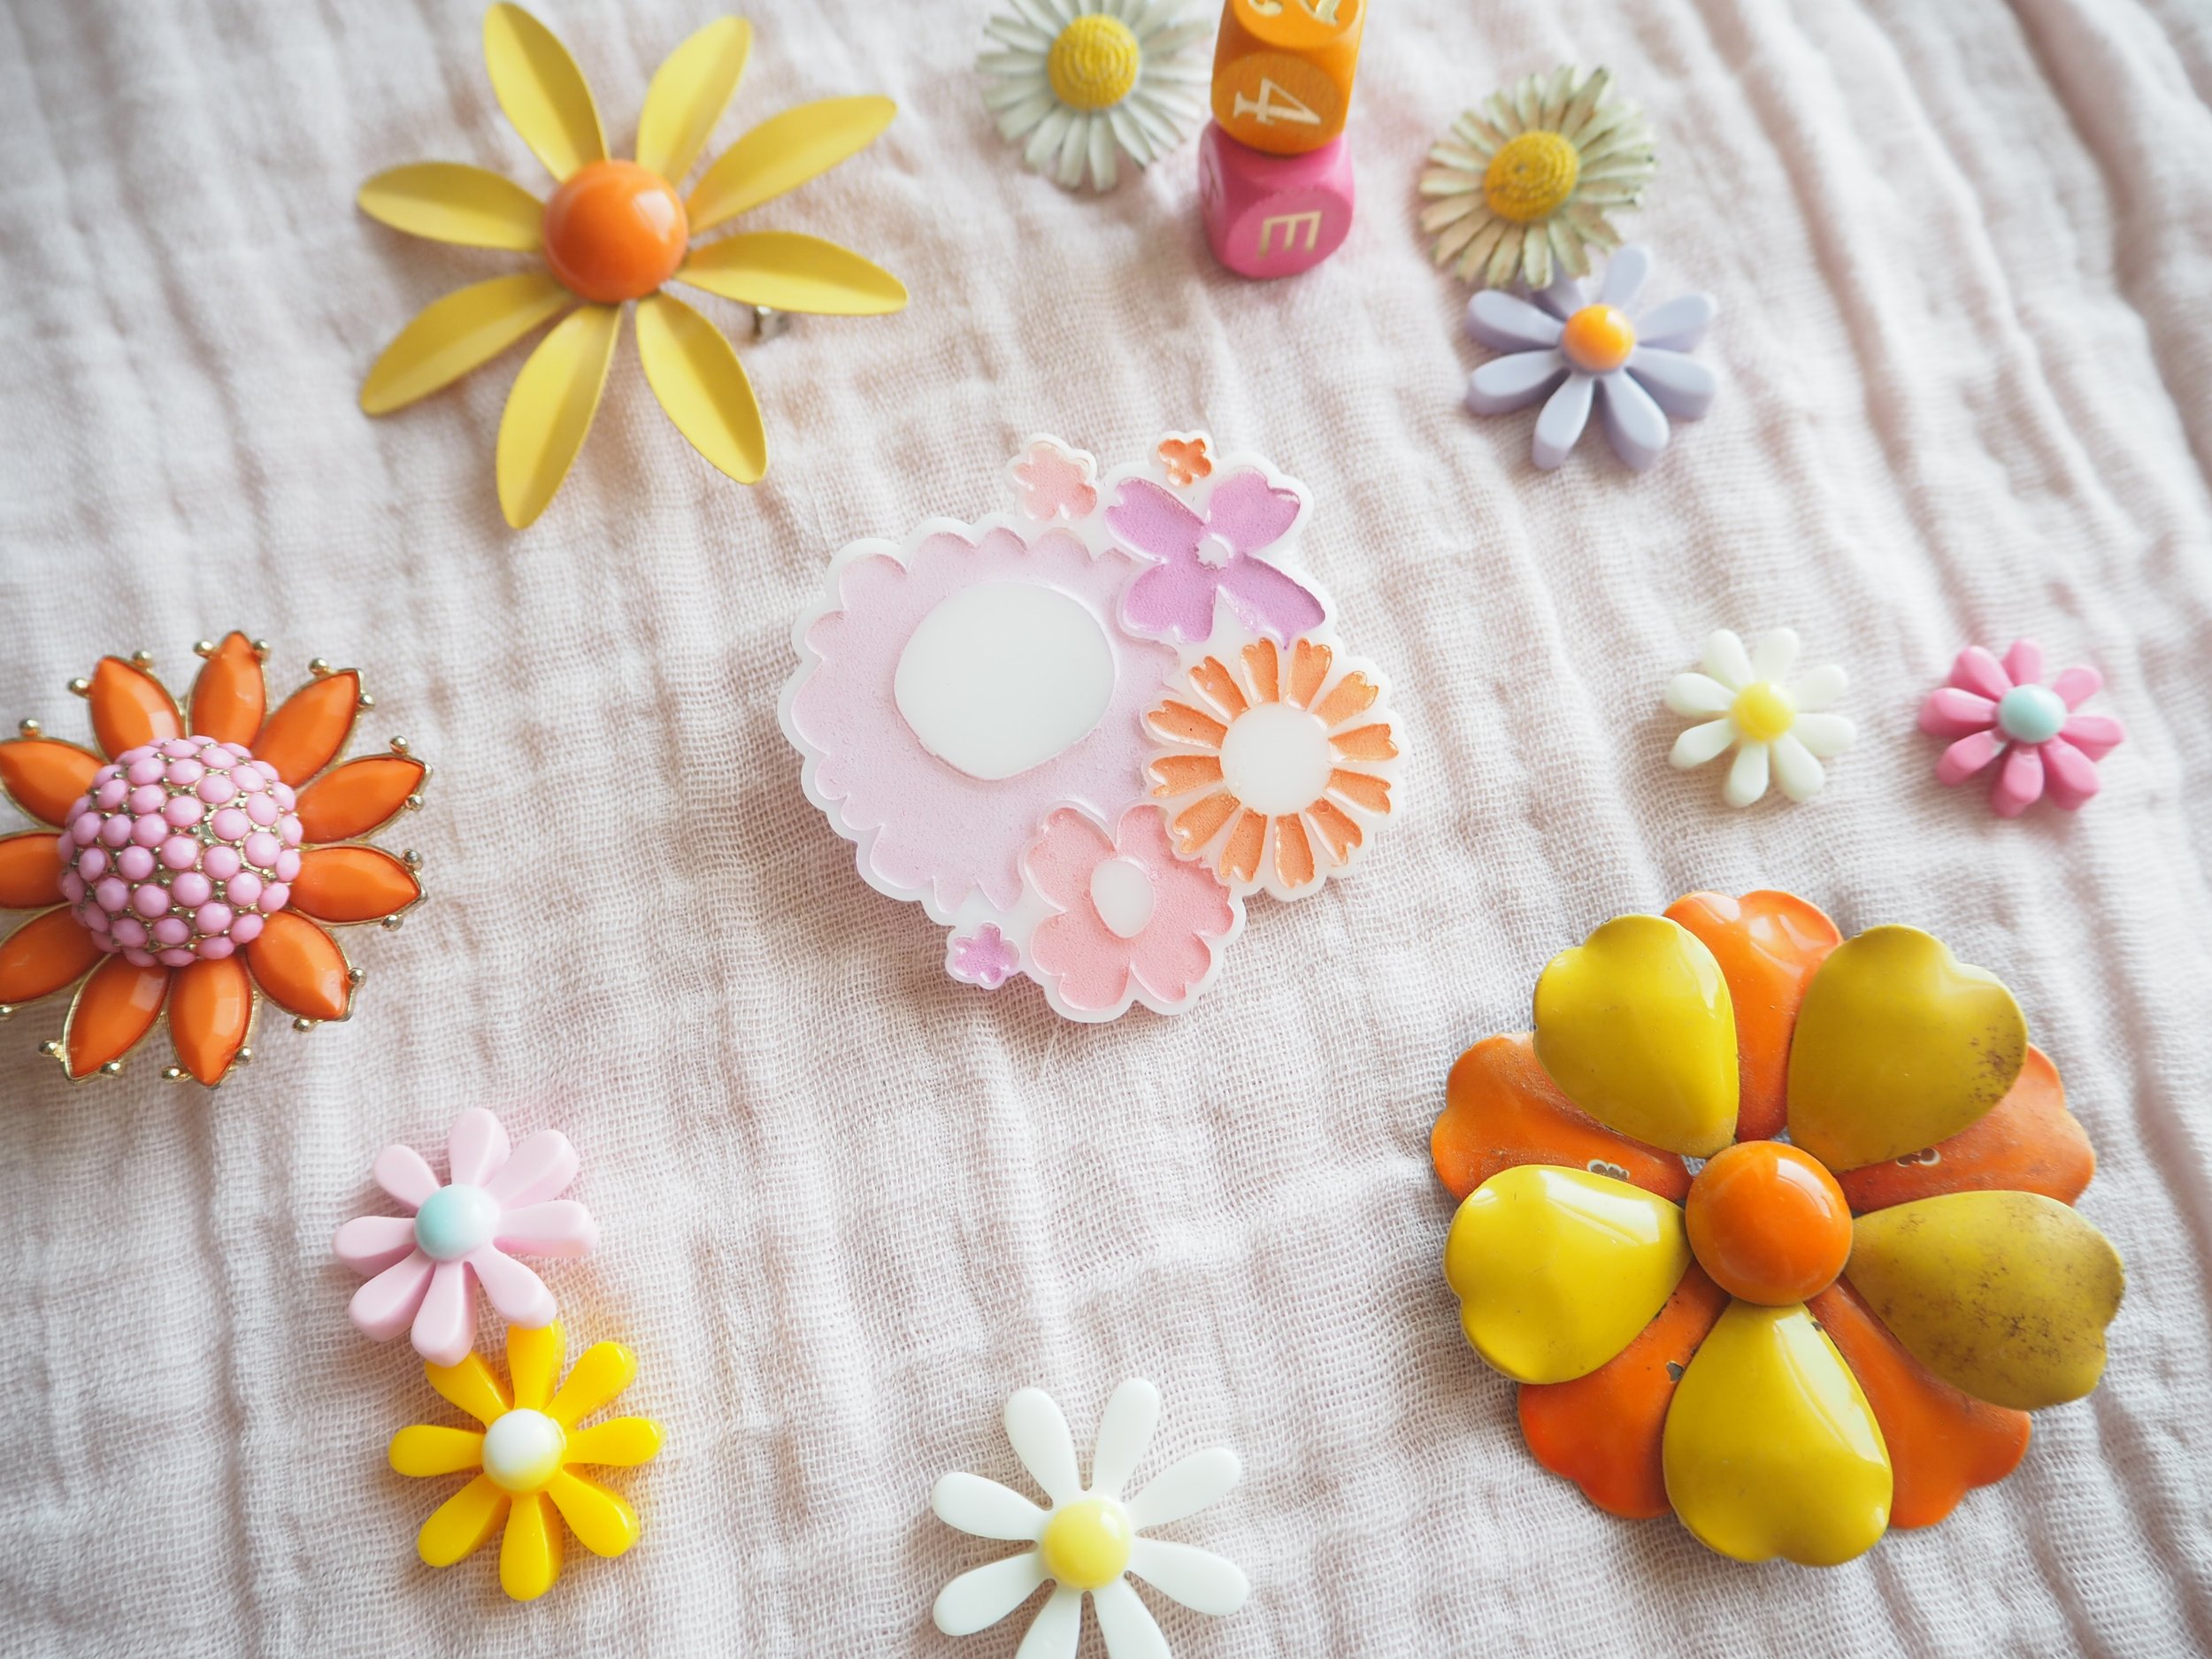 New Acrylic Broach Pins in the SHOP_090195.JPG